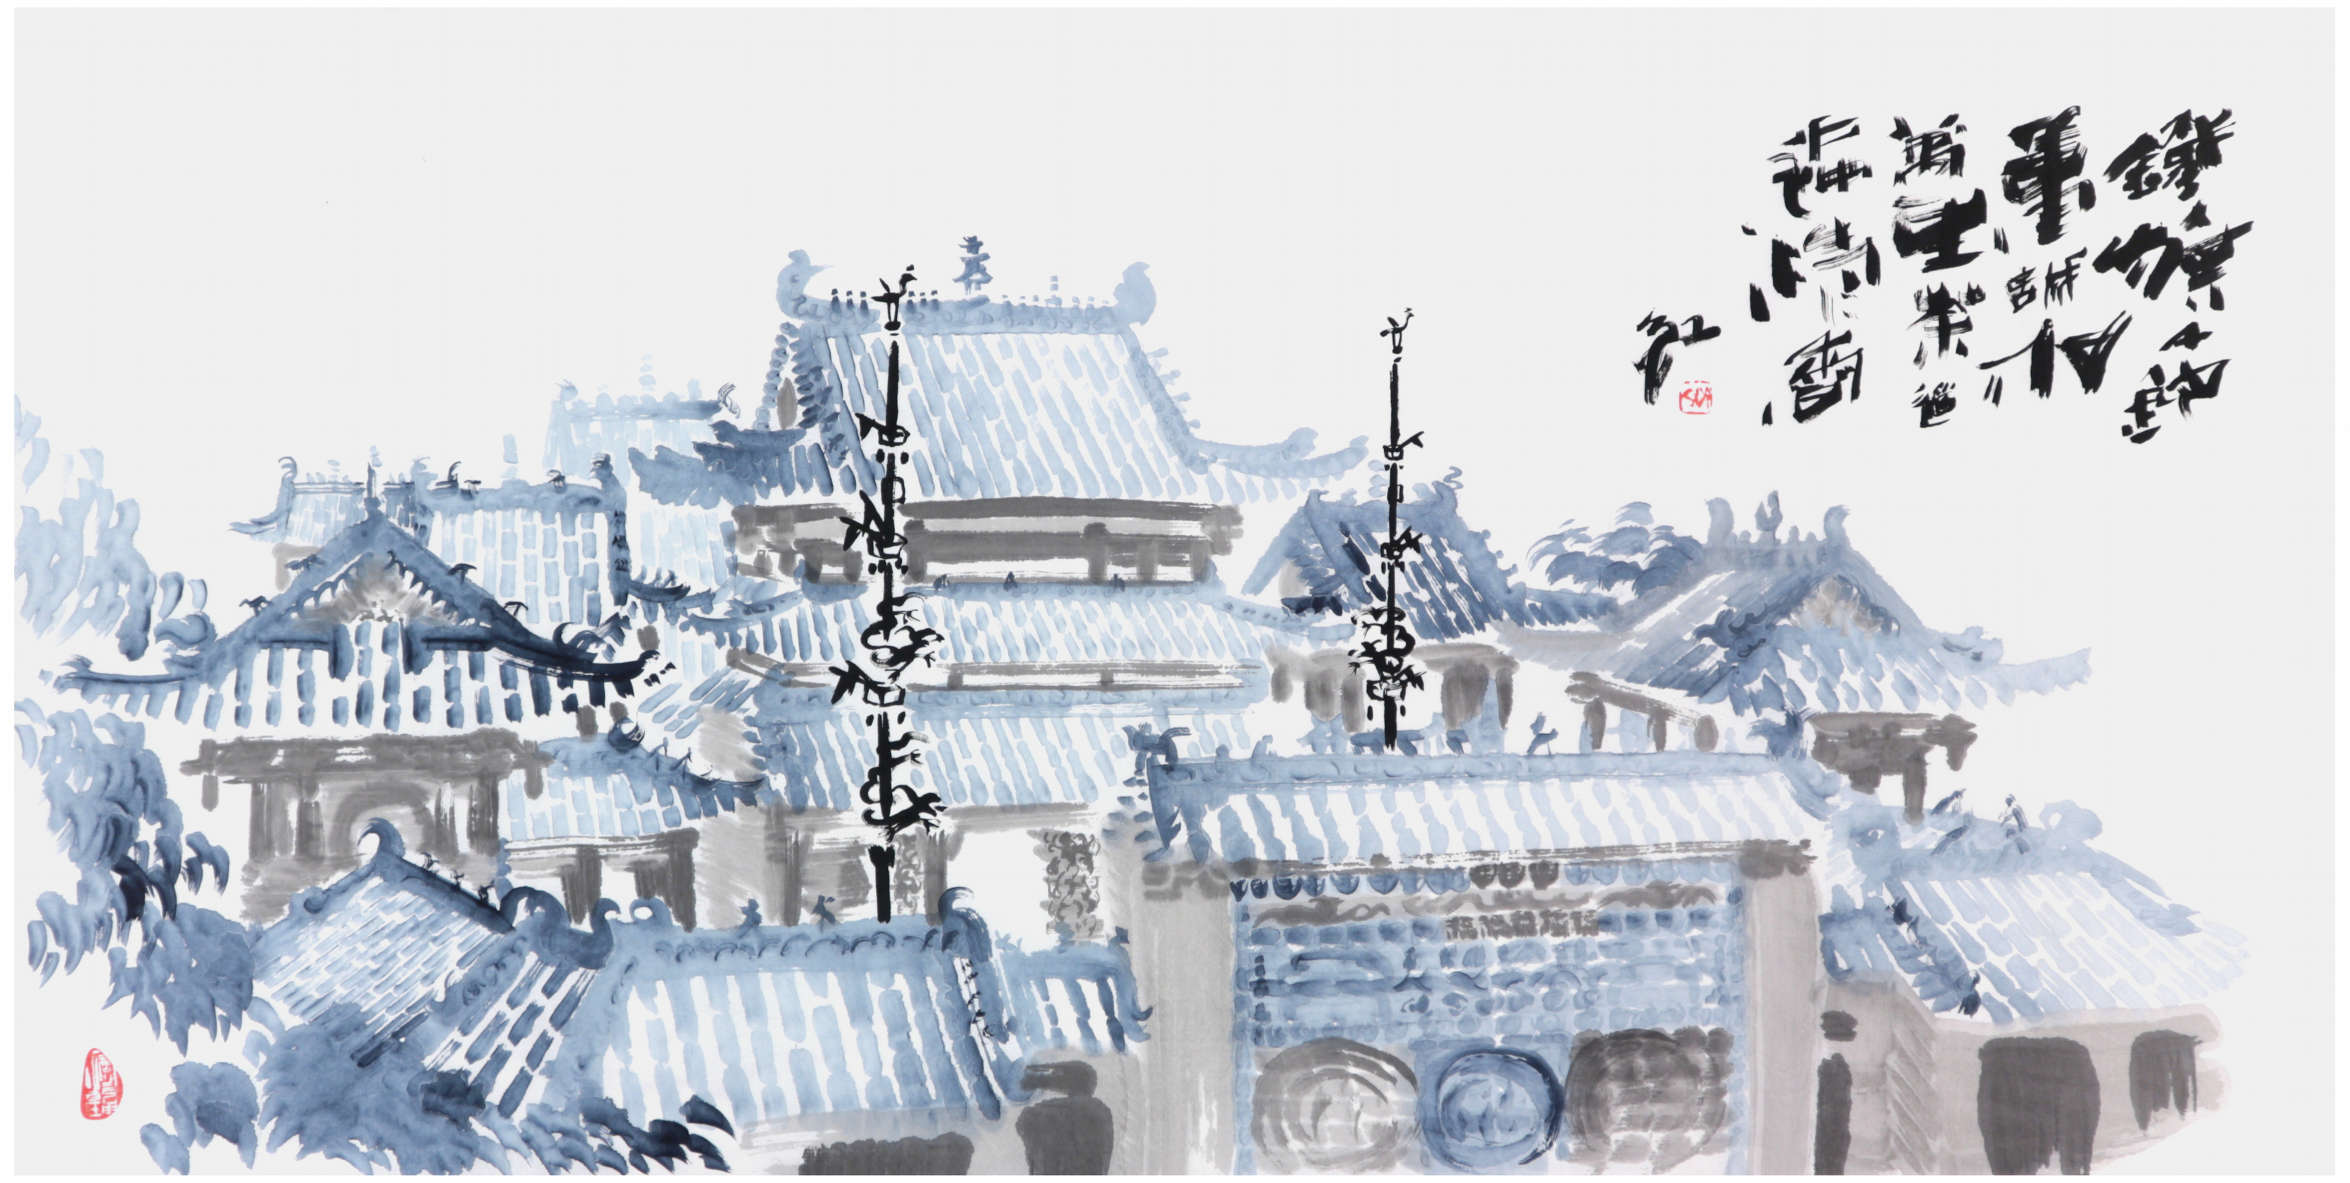 Sai Koh (Qi Hong)’s freehand brushwork Chinese painting (aka, ruler painting,  literati painting,  ink wash painting, ink painting, ink brush painting): Sheqi Shan Shaan Guild Hall, 138×69cm, ink & color on Mian Liao Mian Lian Xuan paper